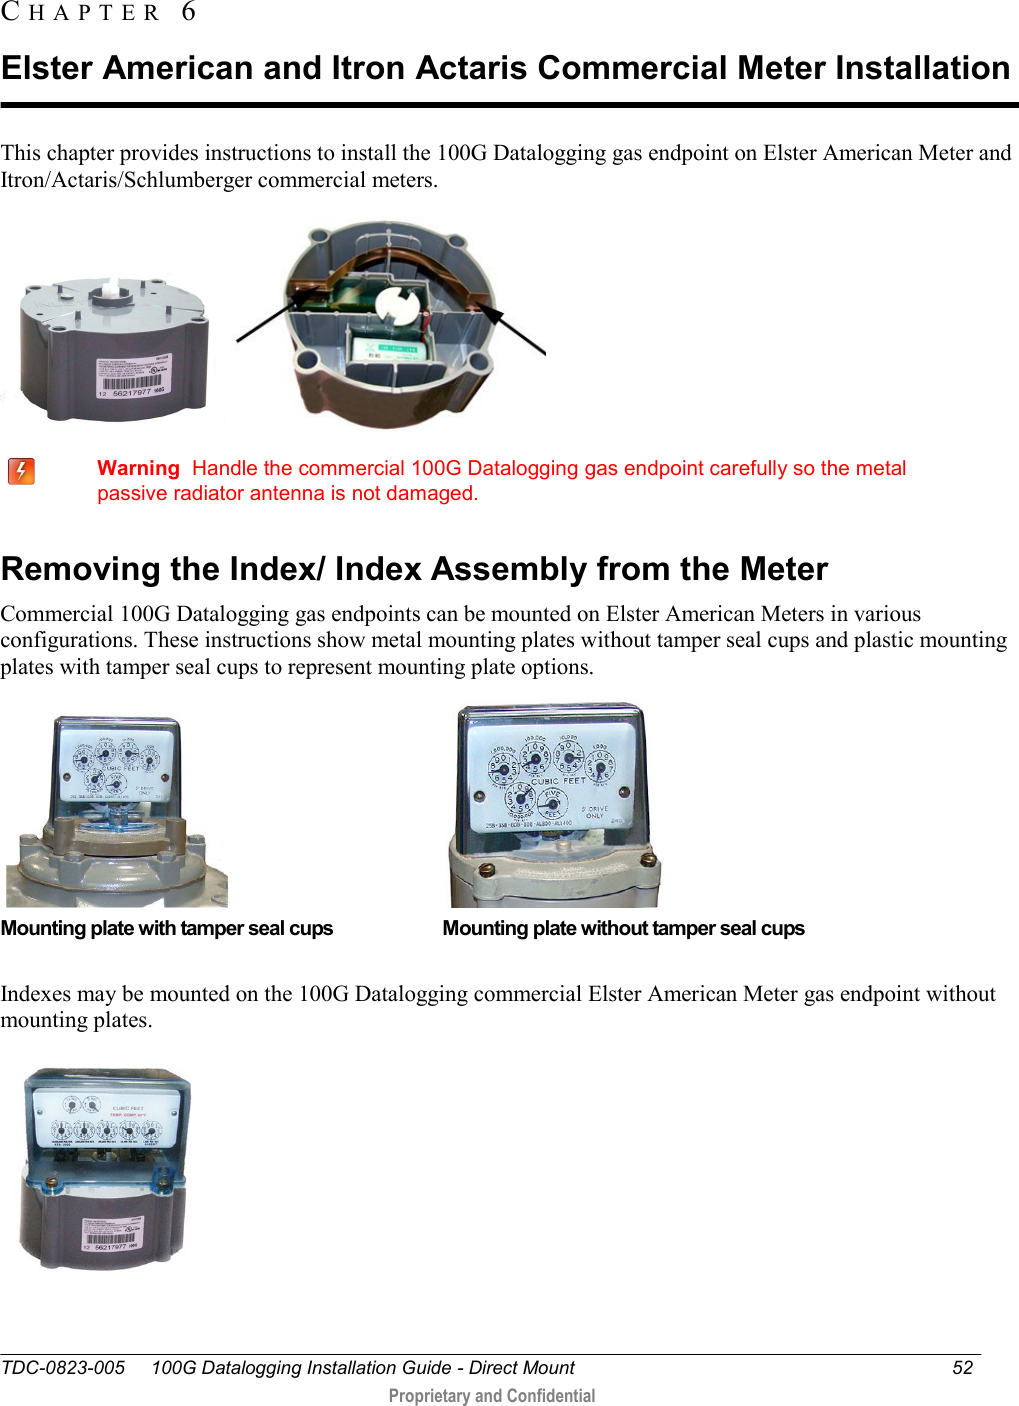  TDC-0823-005     100G Datalogging Installation Guide - Direct Mount  52   Proprietary and Confidential     This chapter provides instructions to install the 100G Datalogging gas endpoint on Elster American Meter and Itron/Actaris/Schlumberger commercial meters.        Warning  Handle the commercial 100G Datalogging gas endpoint carefully so the metal passive radiator antenna is not damaged.  Removing the Index/ Index Assembly from the Meter Commercial 100G Datalogging gas endpoints can be mounted on Elster American Meters in various configurations. These instructions show metal mounting plates without tamper seal cups and plastic mounting plates with tamper seal cups to represent mounting plate options.                                                        Mounting plate with tamper seal cups                       Mounting plate without tamper seal cups  Indexes may be mounted on the 100G Datalogging commercial Elster American Meter gas endpoint without mounting plates.  CH A P T E R   6  Elster American and Itron Actaris Commercial Meter Installation 